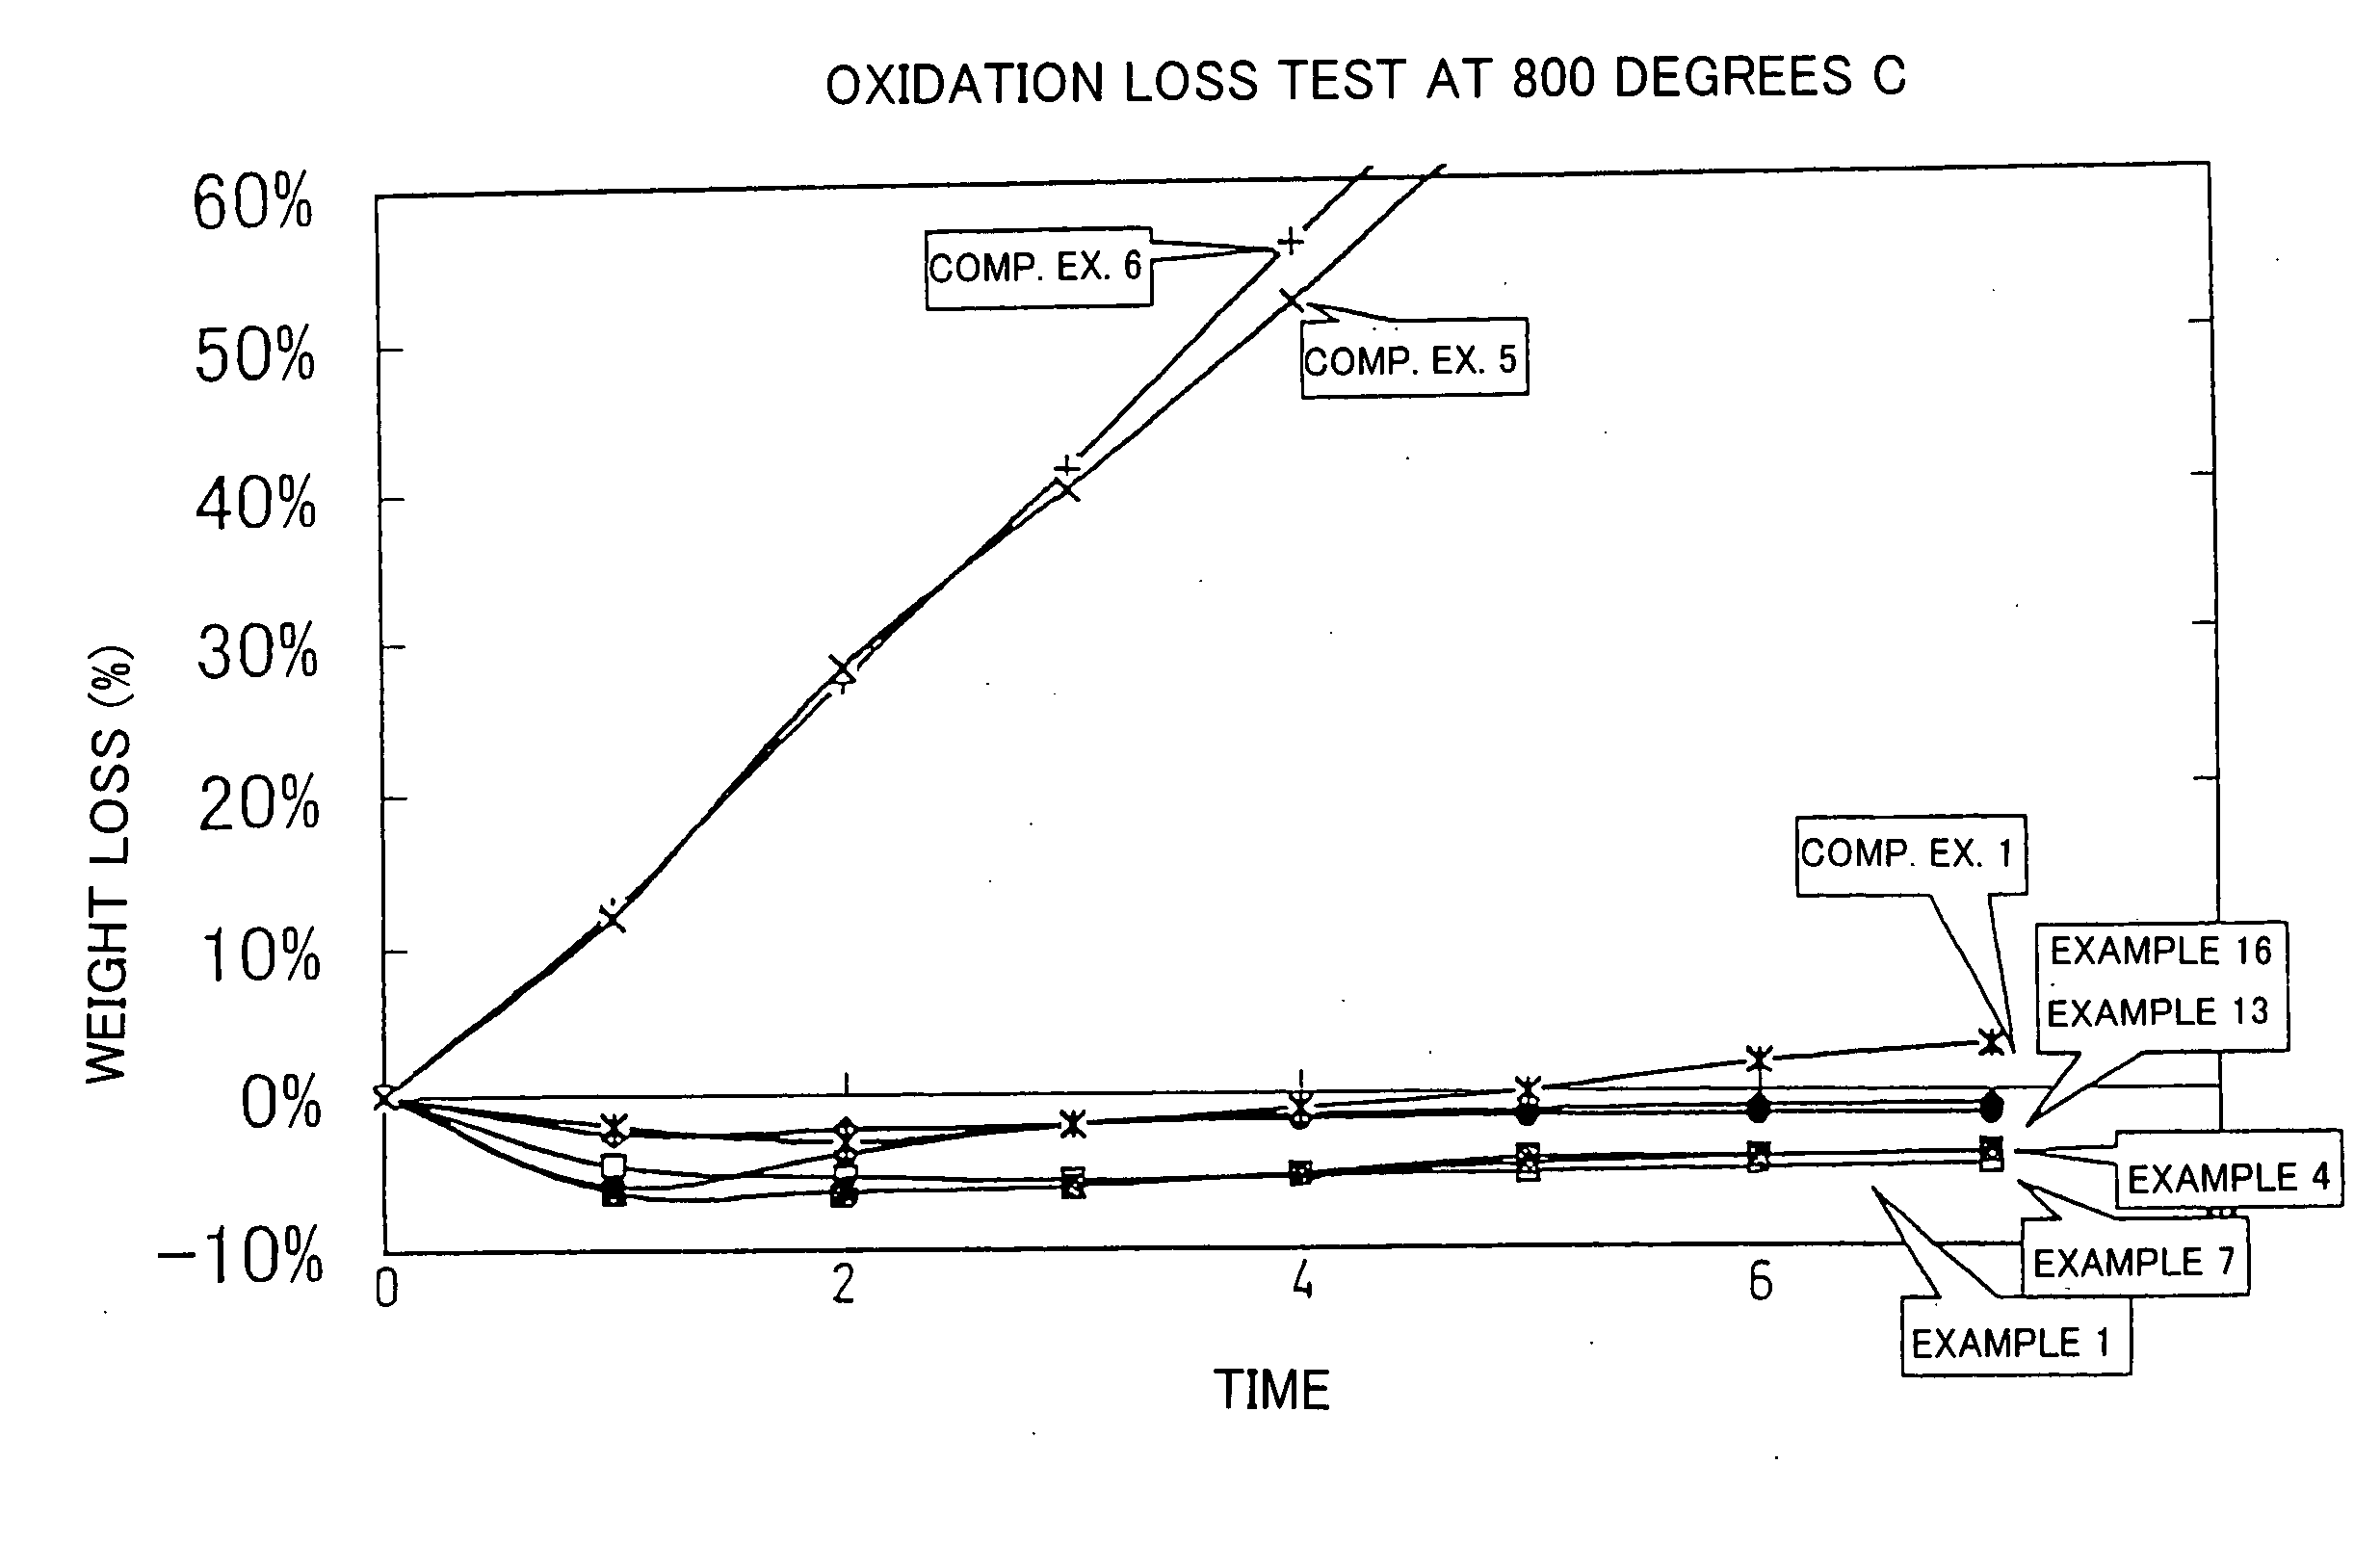 Oxidation resistant carbon fiber reinforced carbon composite material and process for producing the same